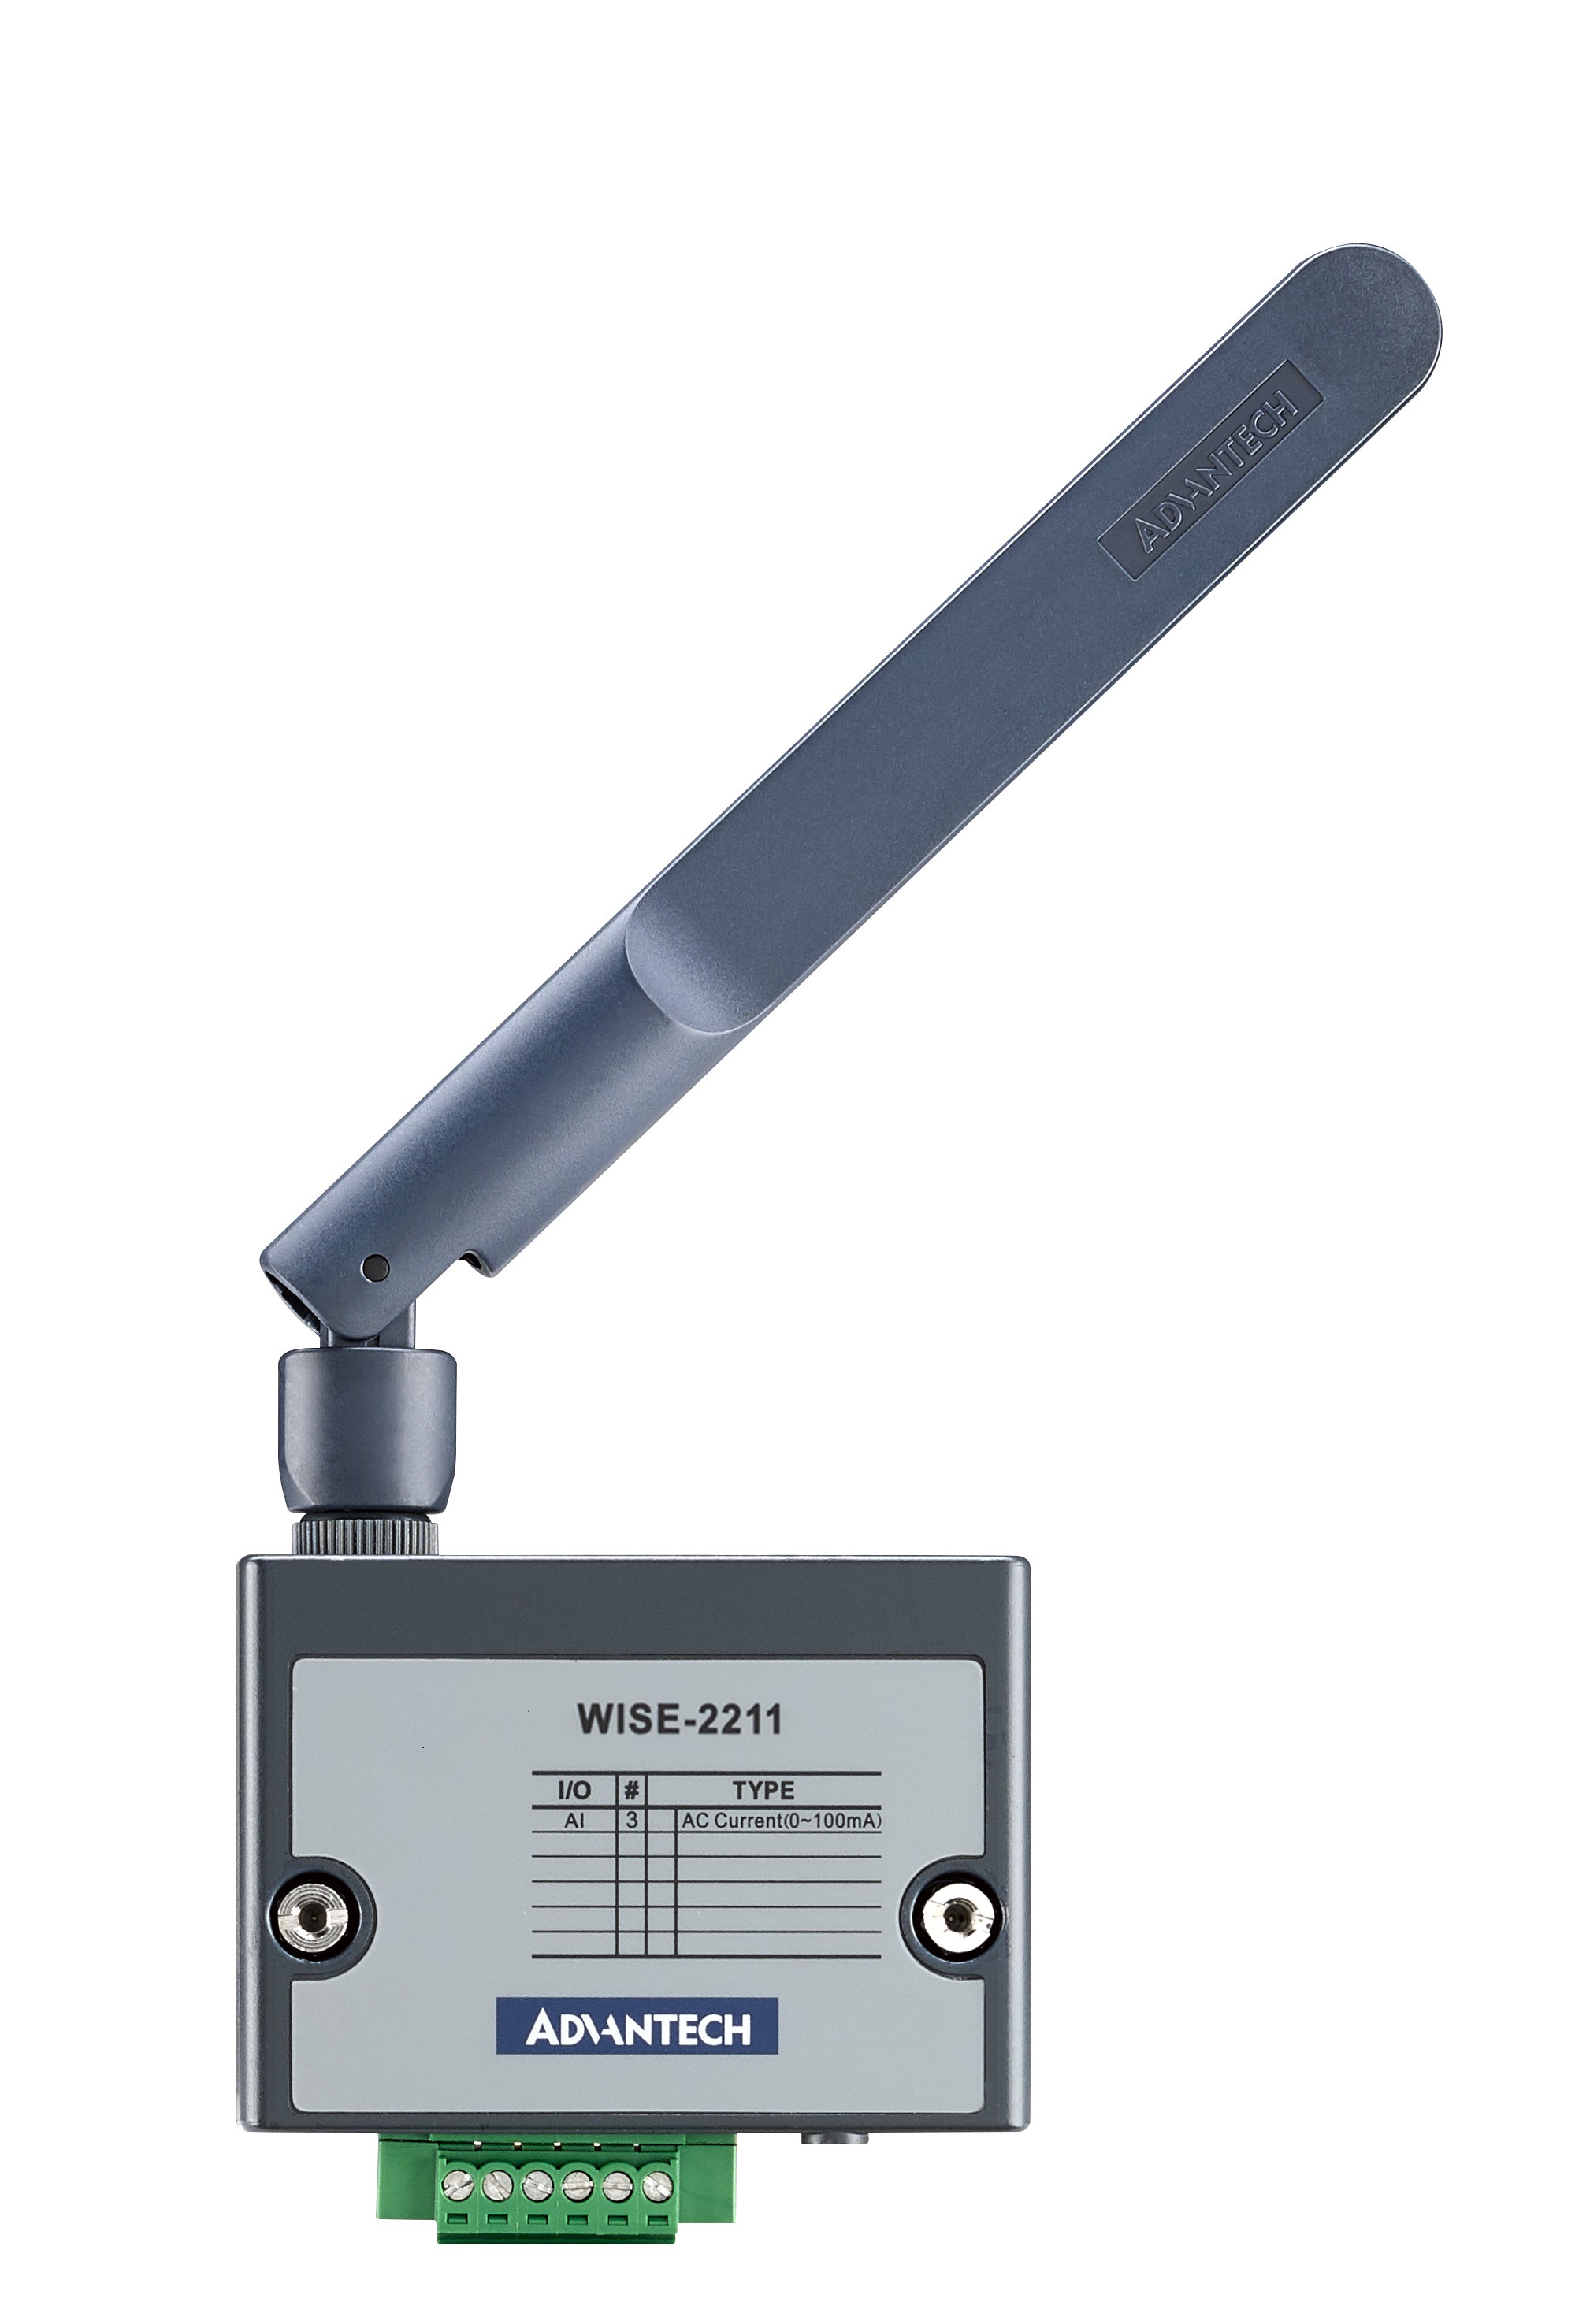 WISE-2211 with antenna